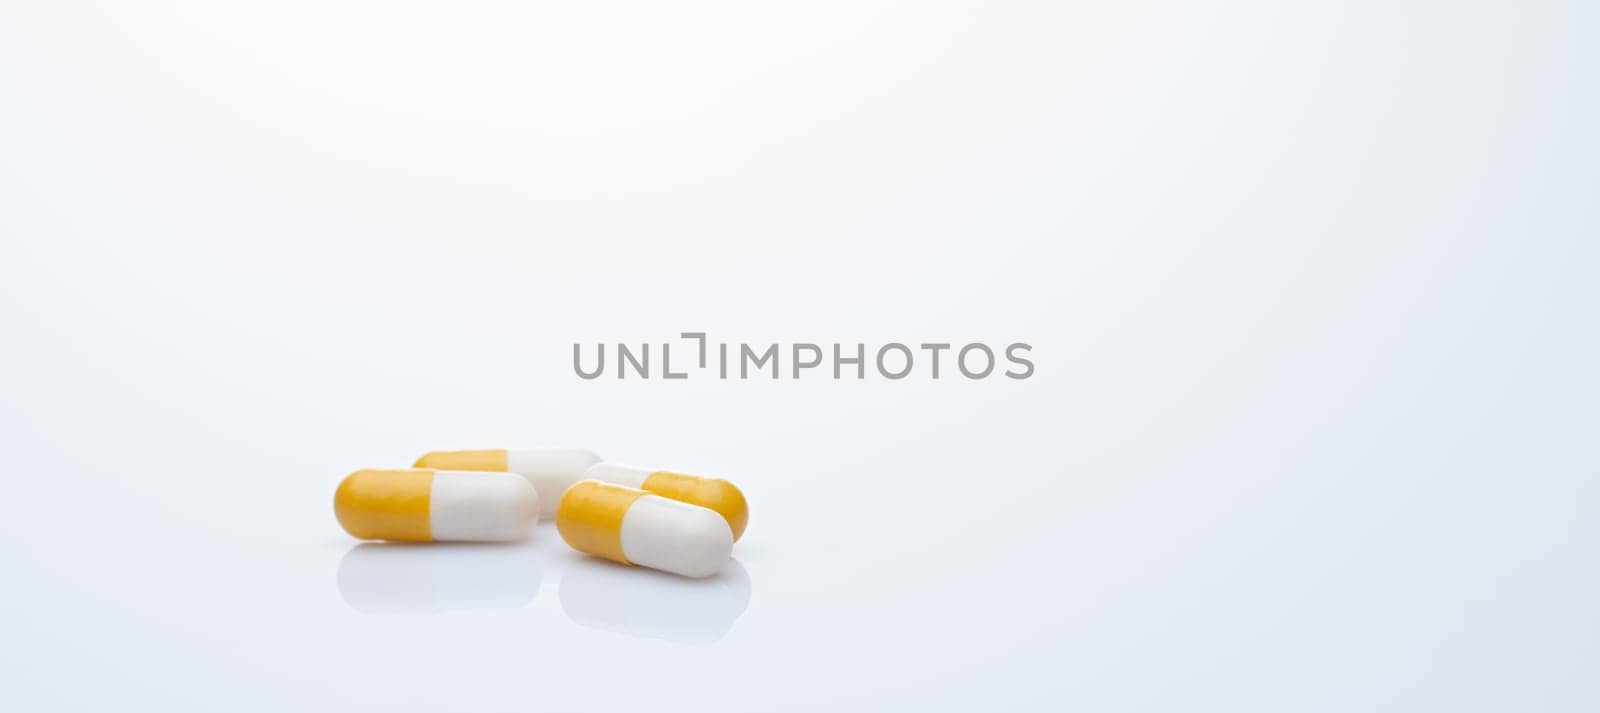 Yellow-white probiotic capsule pill on white background. Probiotic supplement. Gut health. Dietary supplements. Probiotics for a healthy gut. Lactobacillus acidophilus and Bifidobacterium animalis.